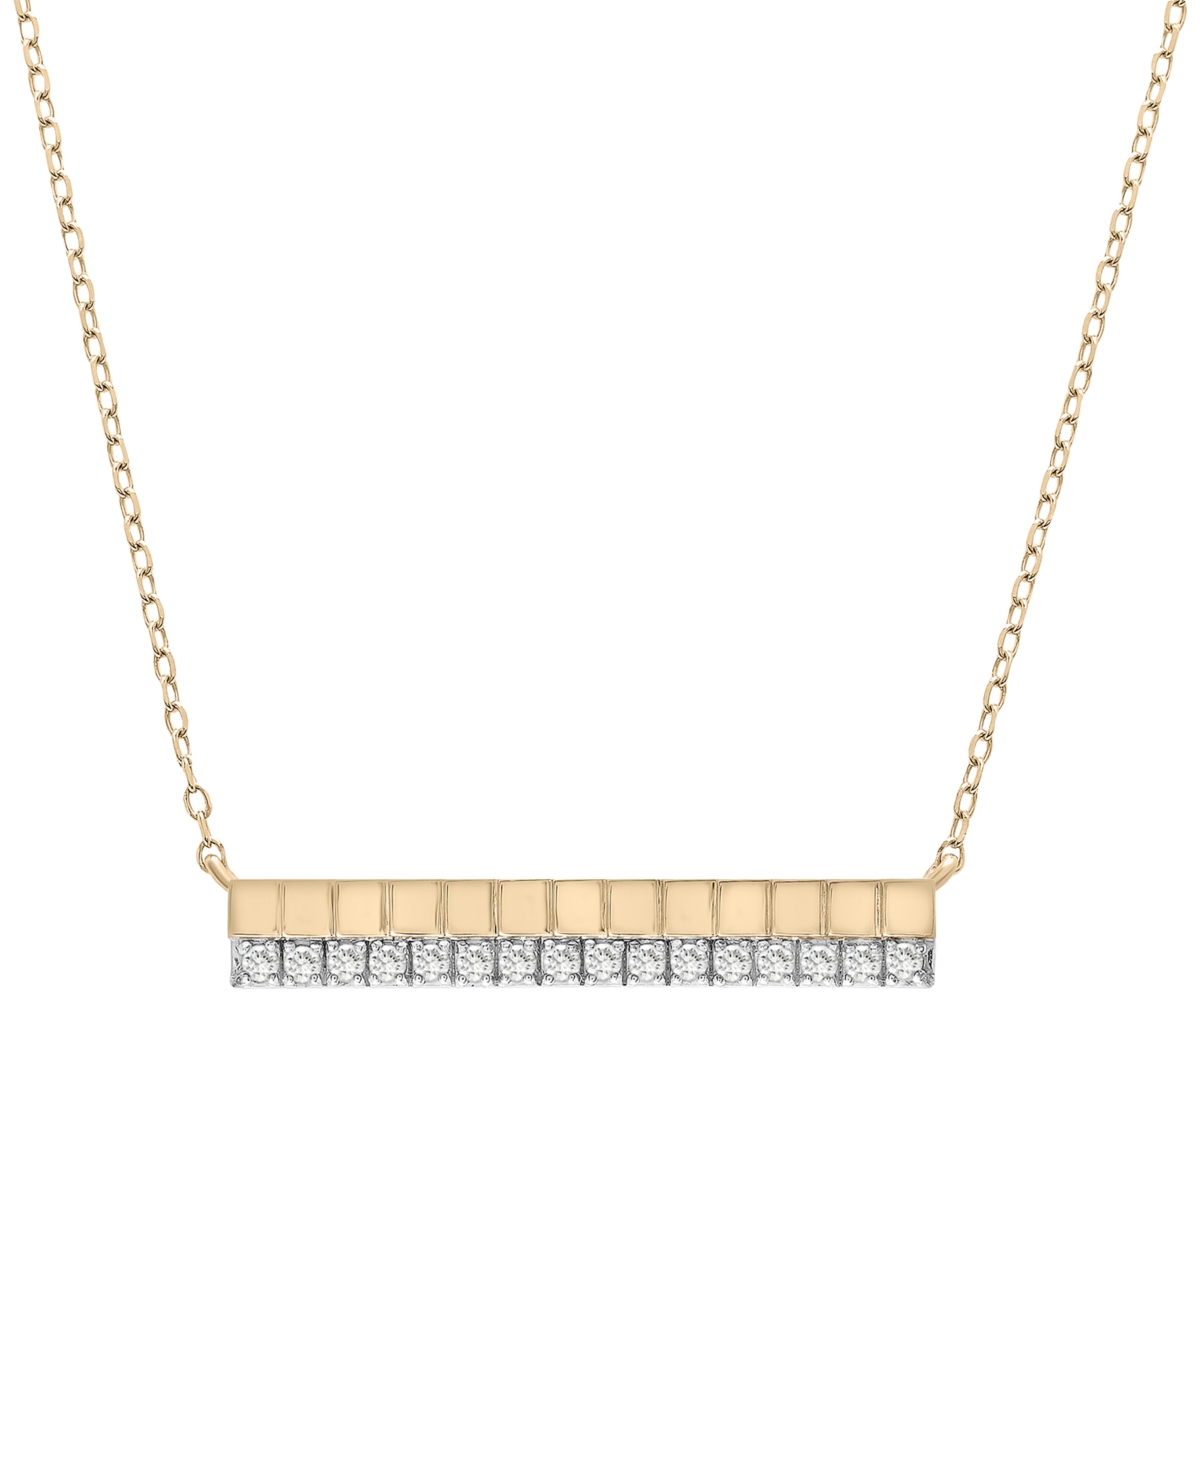 Diamond Textured Bar 18" Pendant Necklace (1/6 ct. t.w.) in Gold Vermeil, Created for Macy's - Gold Vermeil